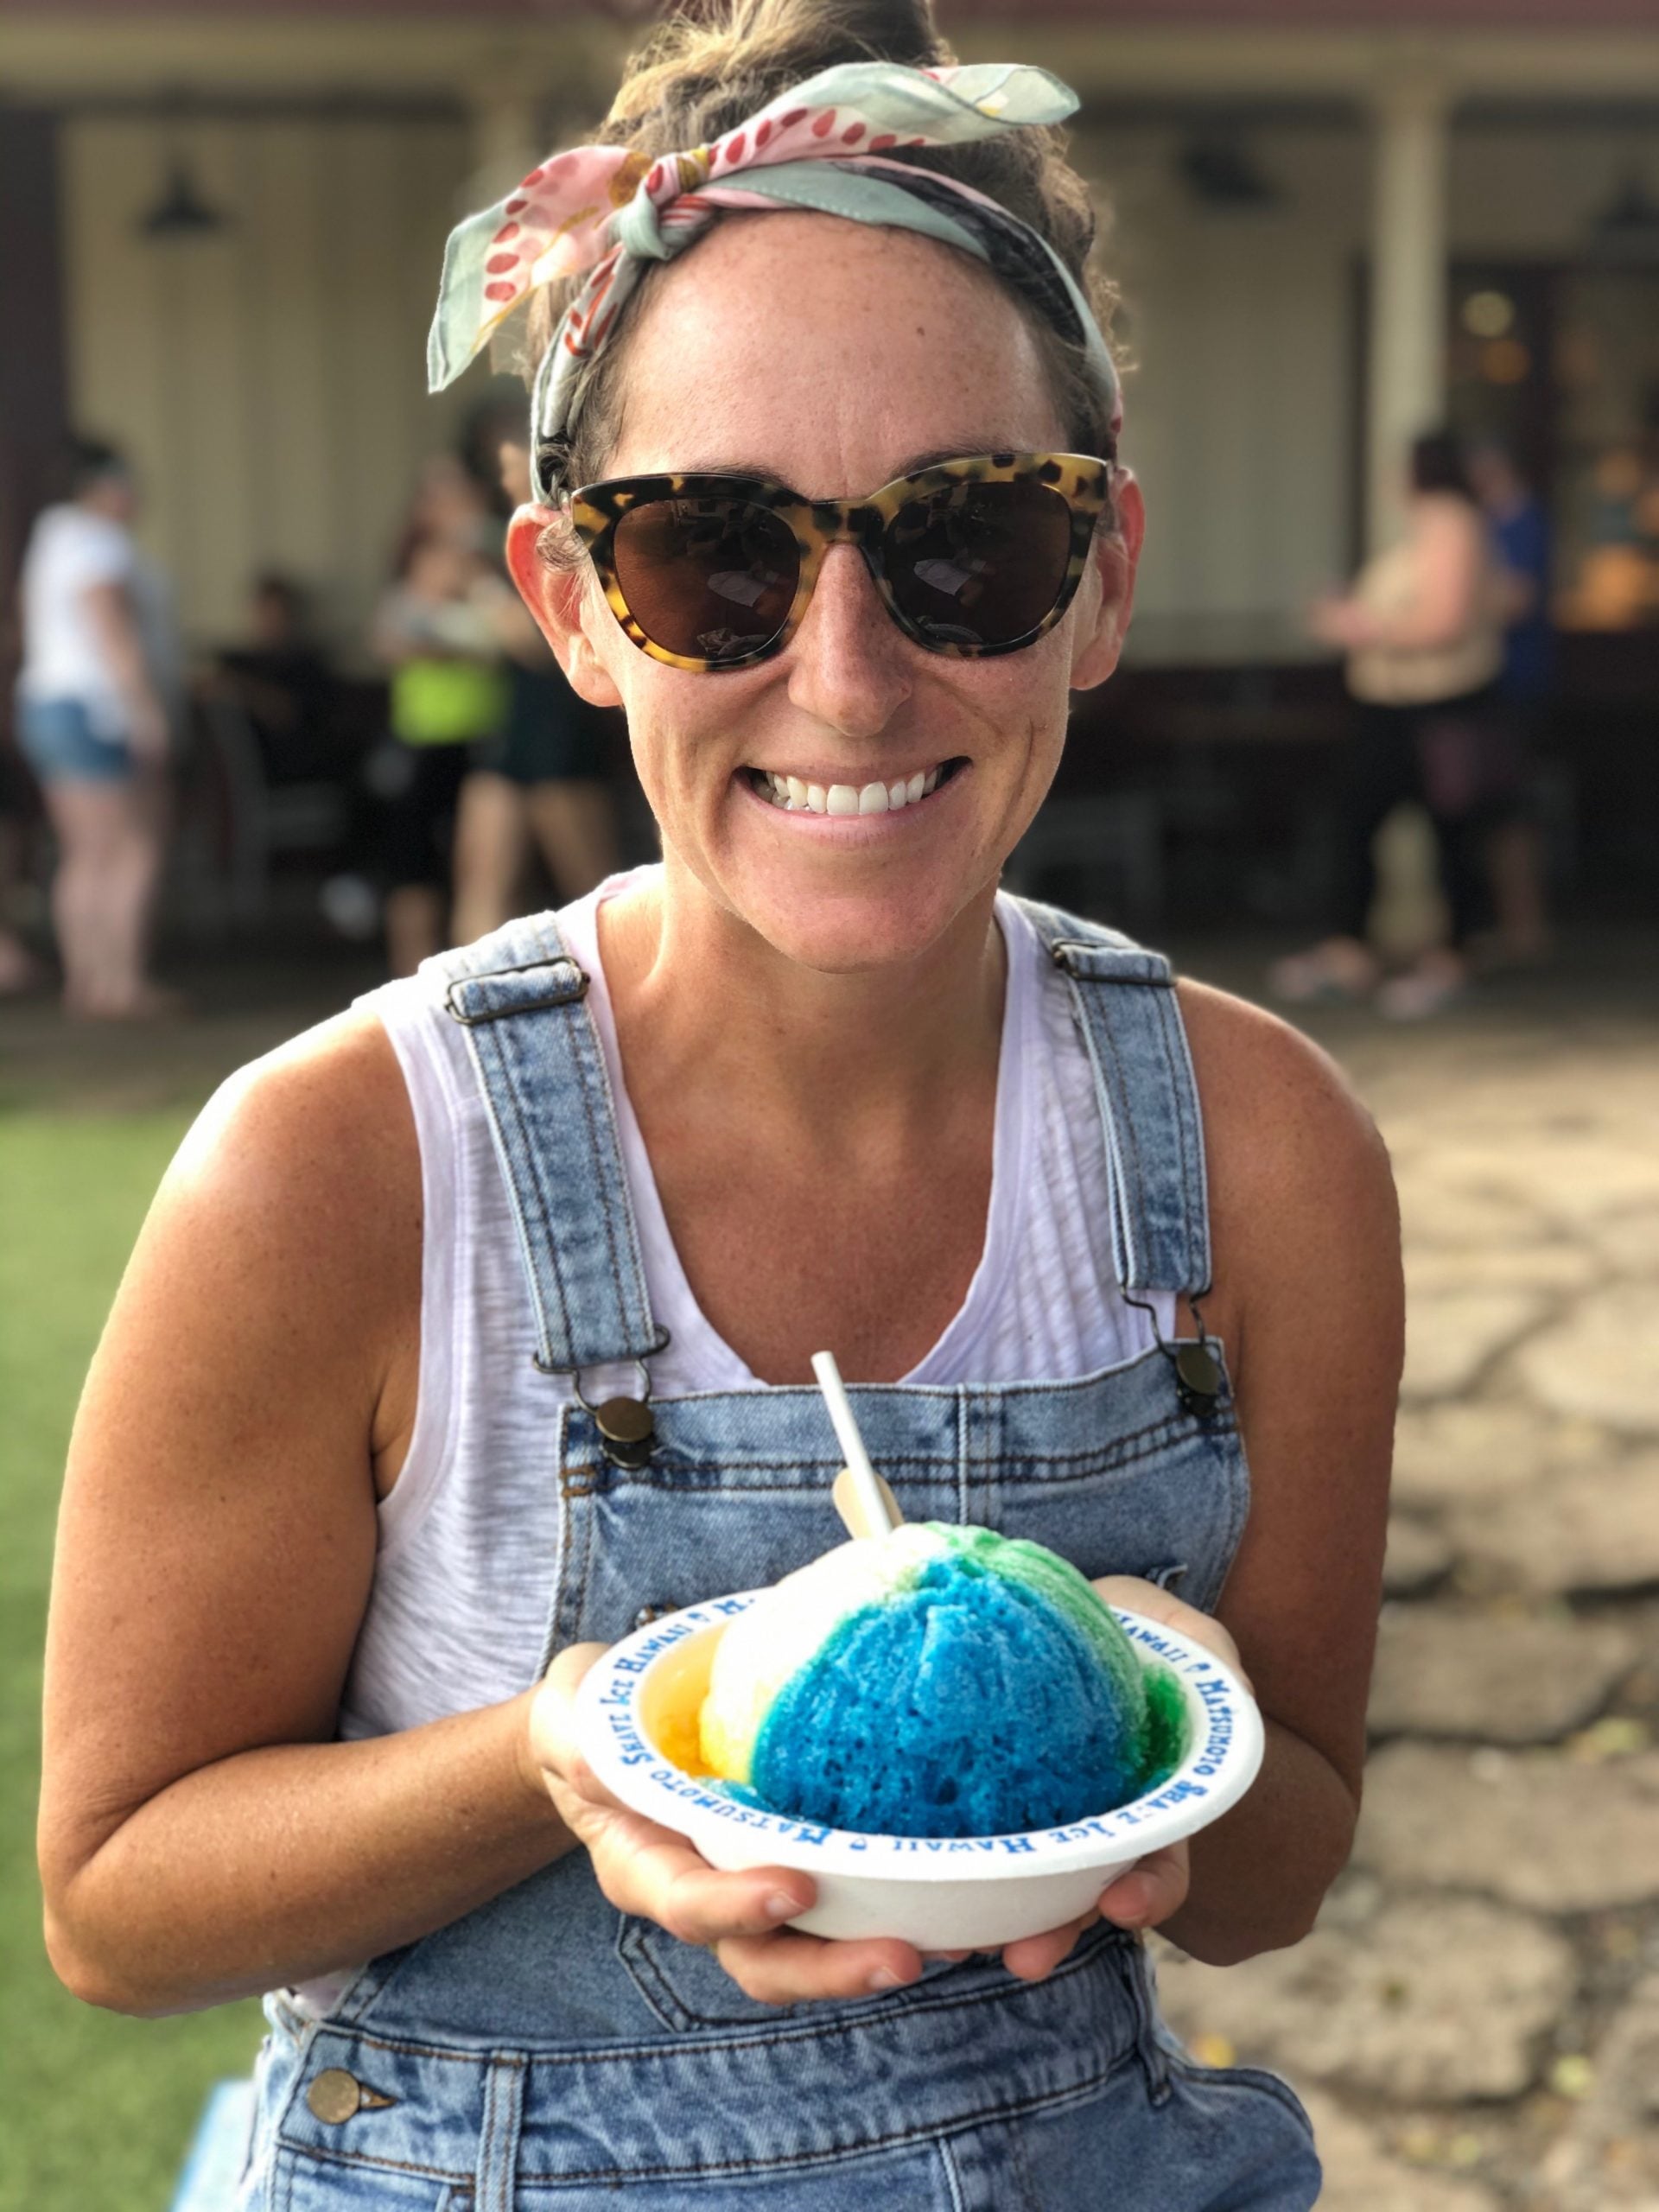 Best Places For Shave Ice On Oahu - Best Shave Ice Oahu - Shaved Ice Oahu - Oahu Shave Ice - Island Snow Oahu - Matsumoto's - Matsumoto Shave Ice - North Shore Hawaii Shave Ice - Uncle Clay's Shave Ice